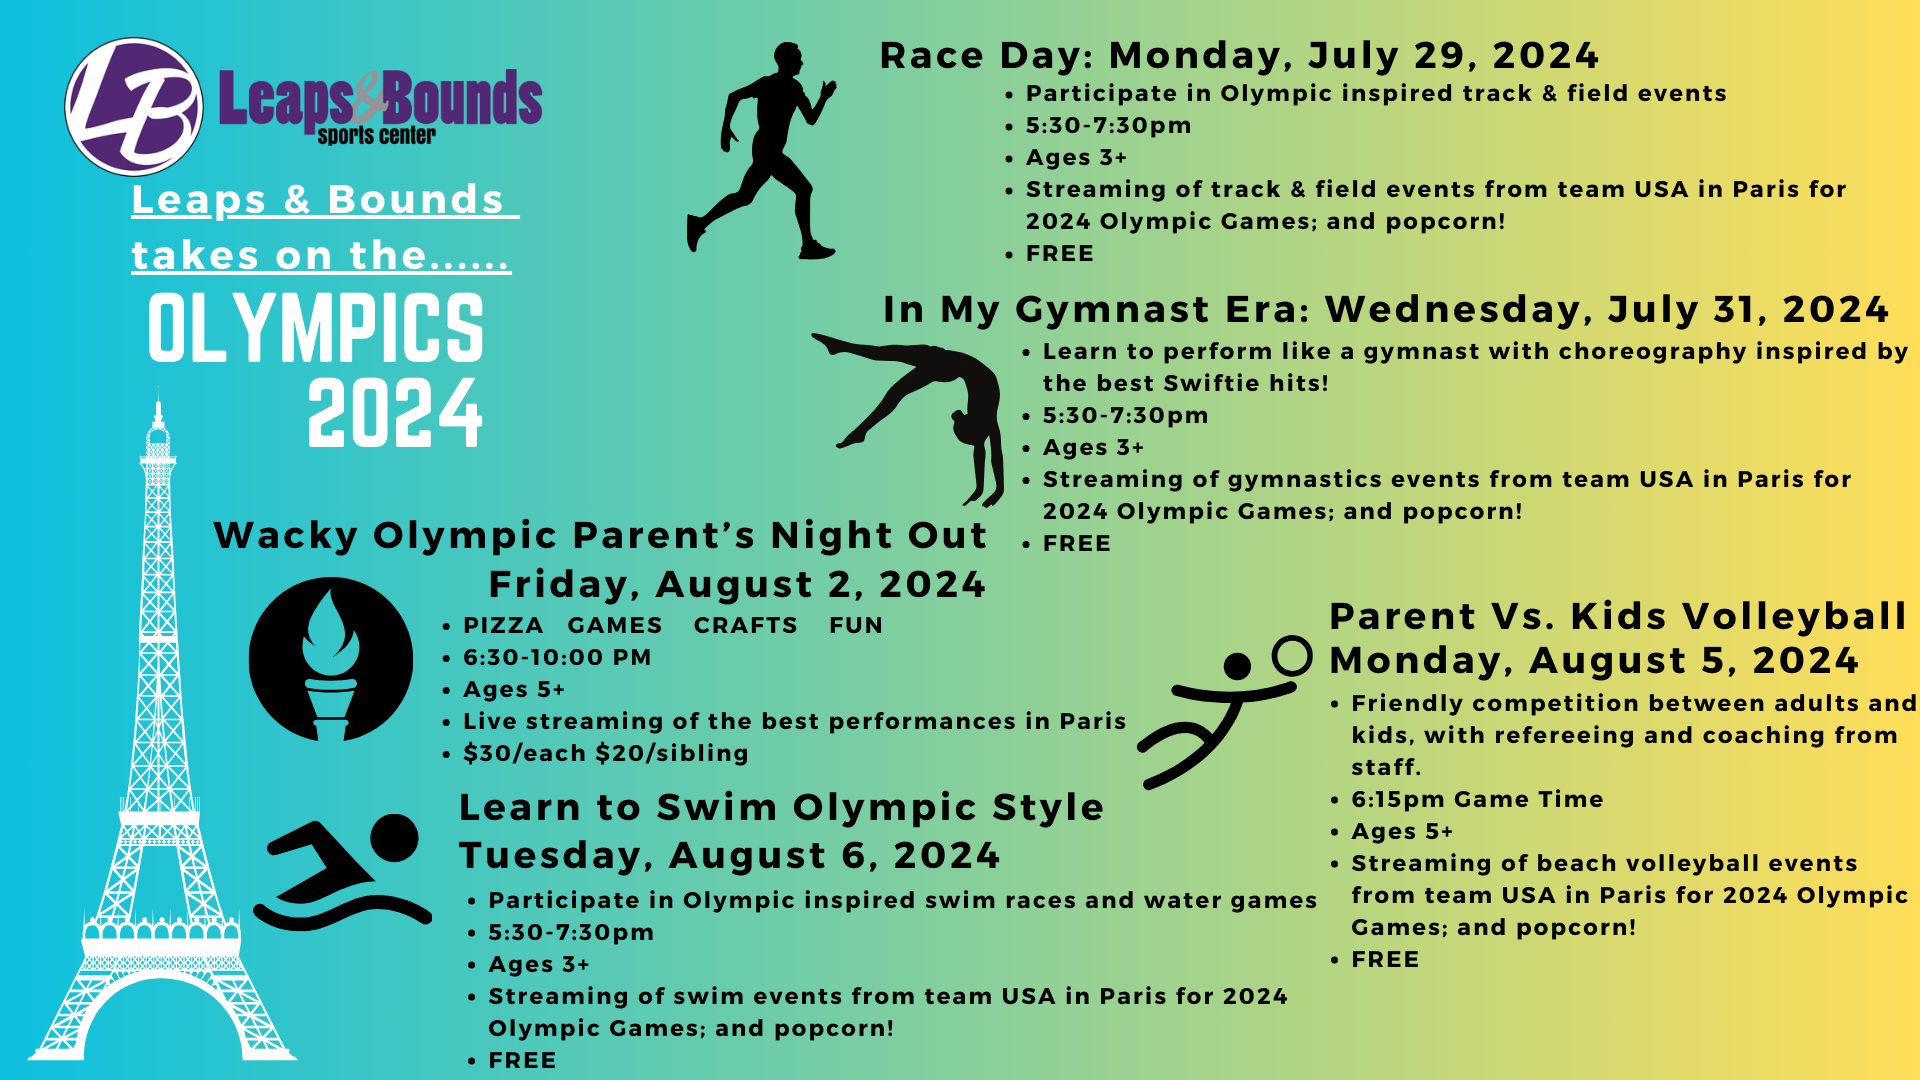 An event flyer for "Leaps & Bounds Olympics 2024" featuring five events: "Race Day" on July 29, "In My Gymnast Era" on July 31, "Wacky Olympic Parent’s Night Out" on August 2, "Learn to Swim Olympic Style" on August 6, and "Parent vs. Kids Volleyball" on August 9.